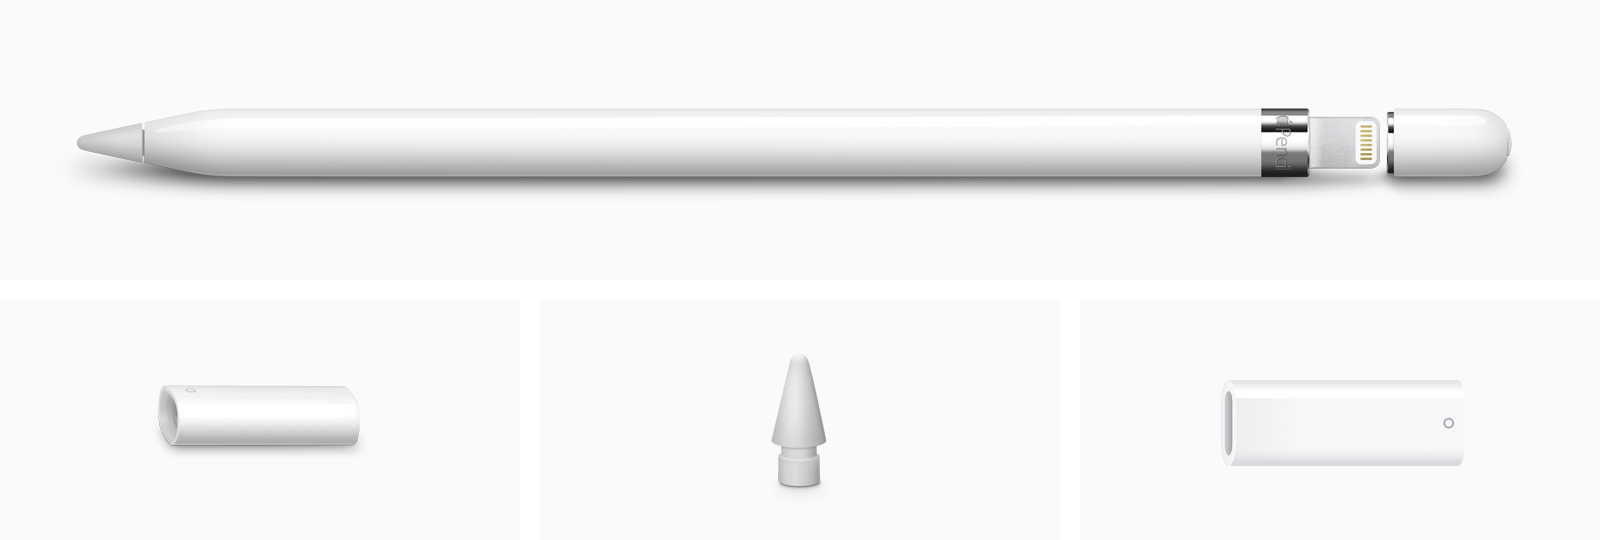 Apple Pencil, Lightning adapter, extra tip and USB-C to Apple Pencil Adapter